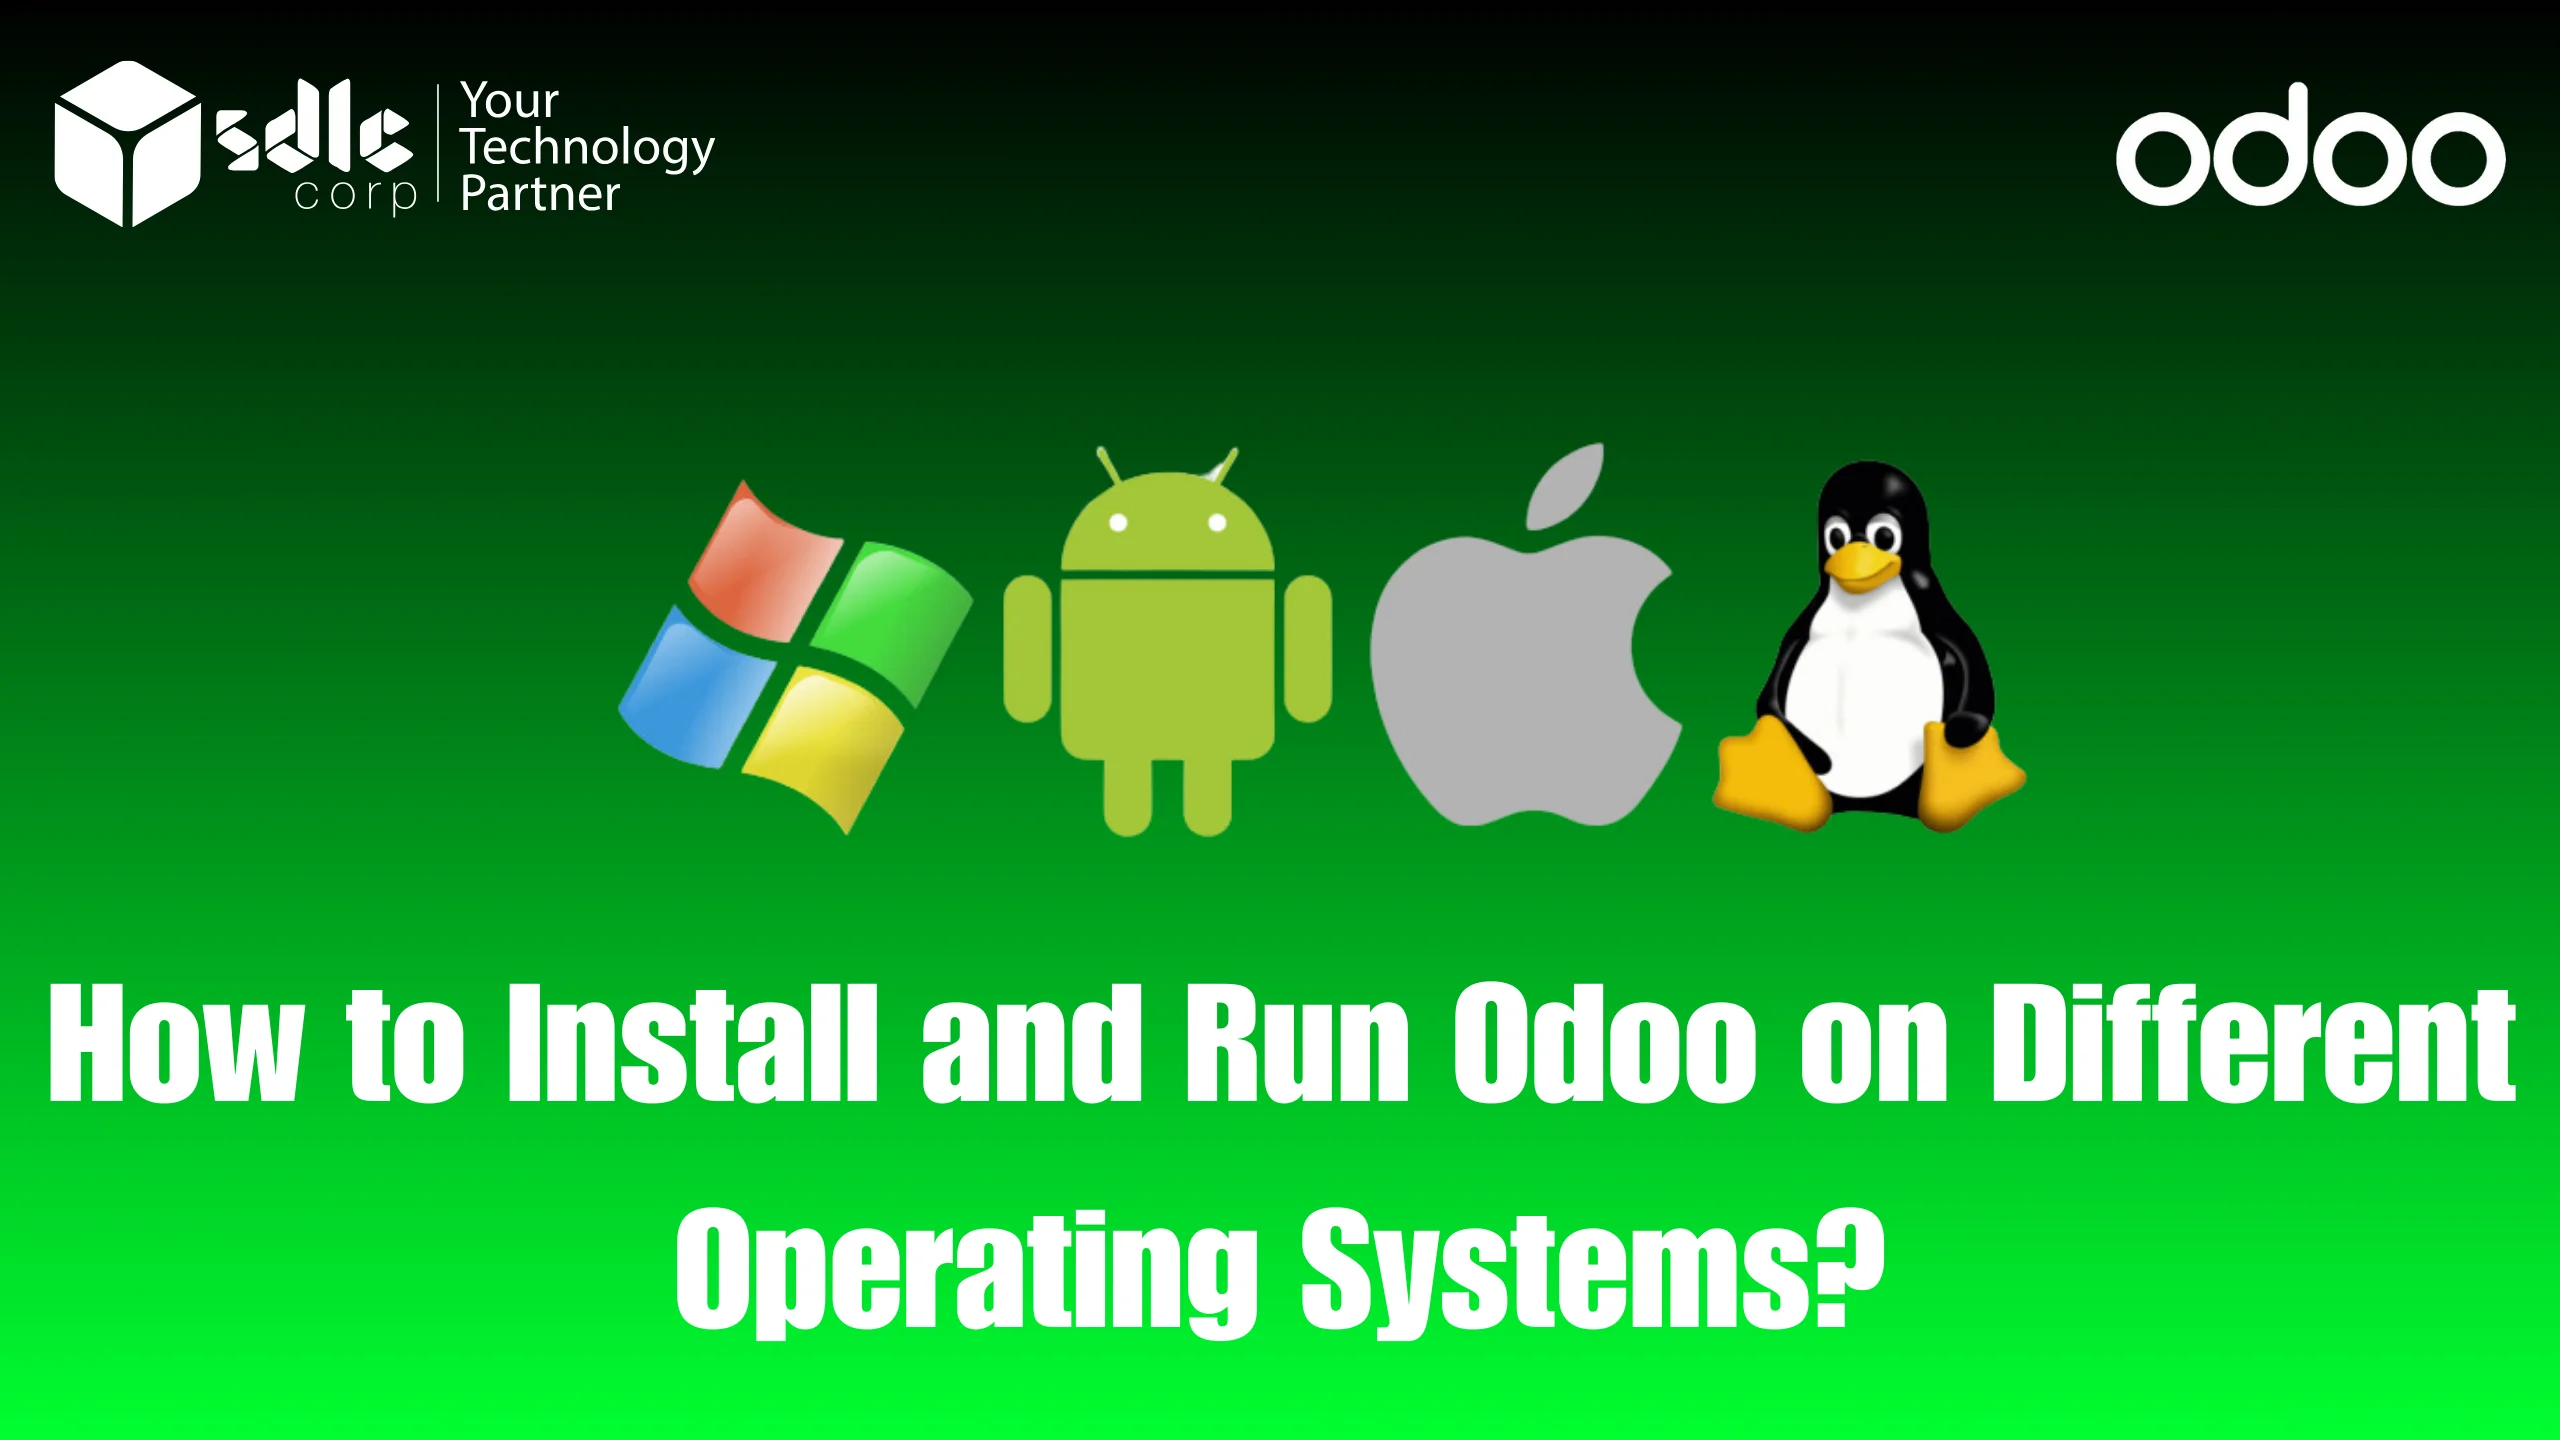 How to Install and Run Odoo on Different Operating Systems?